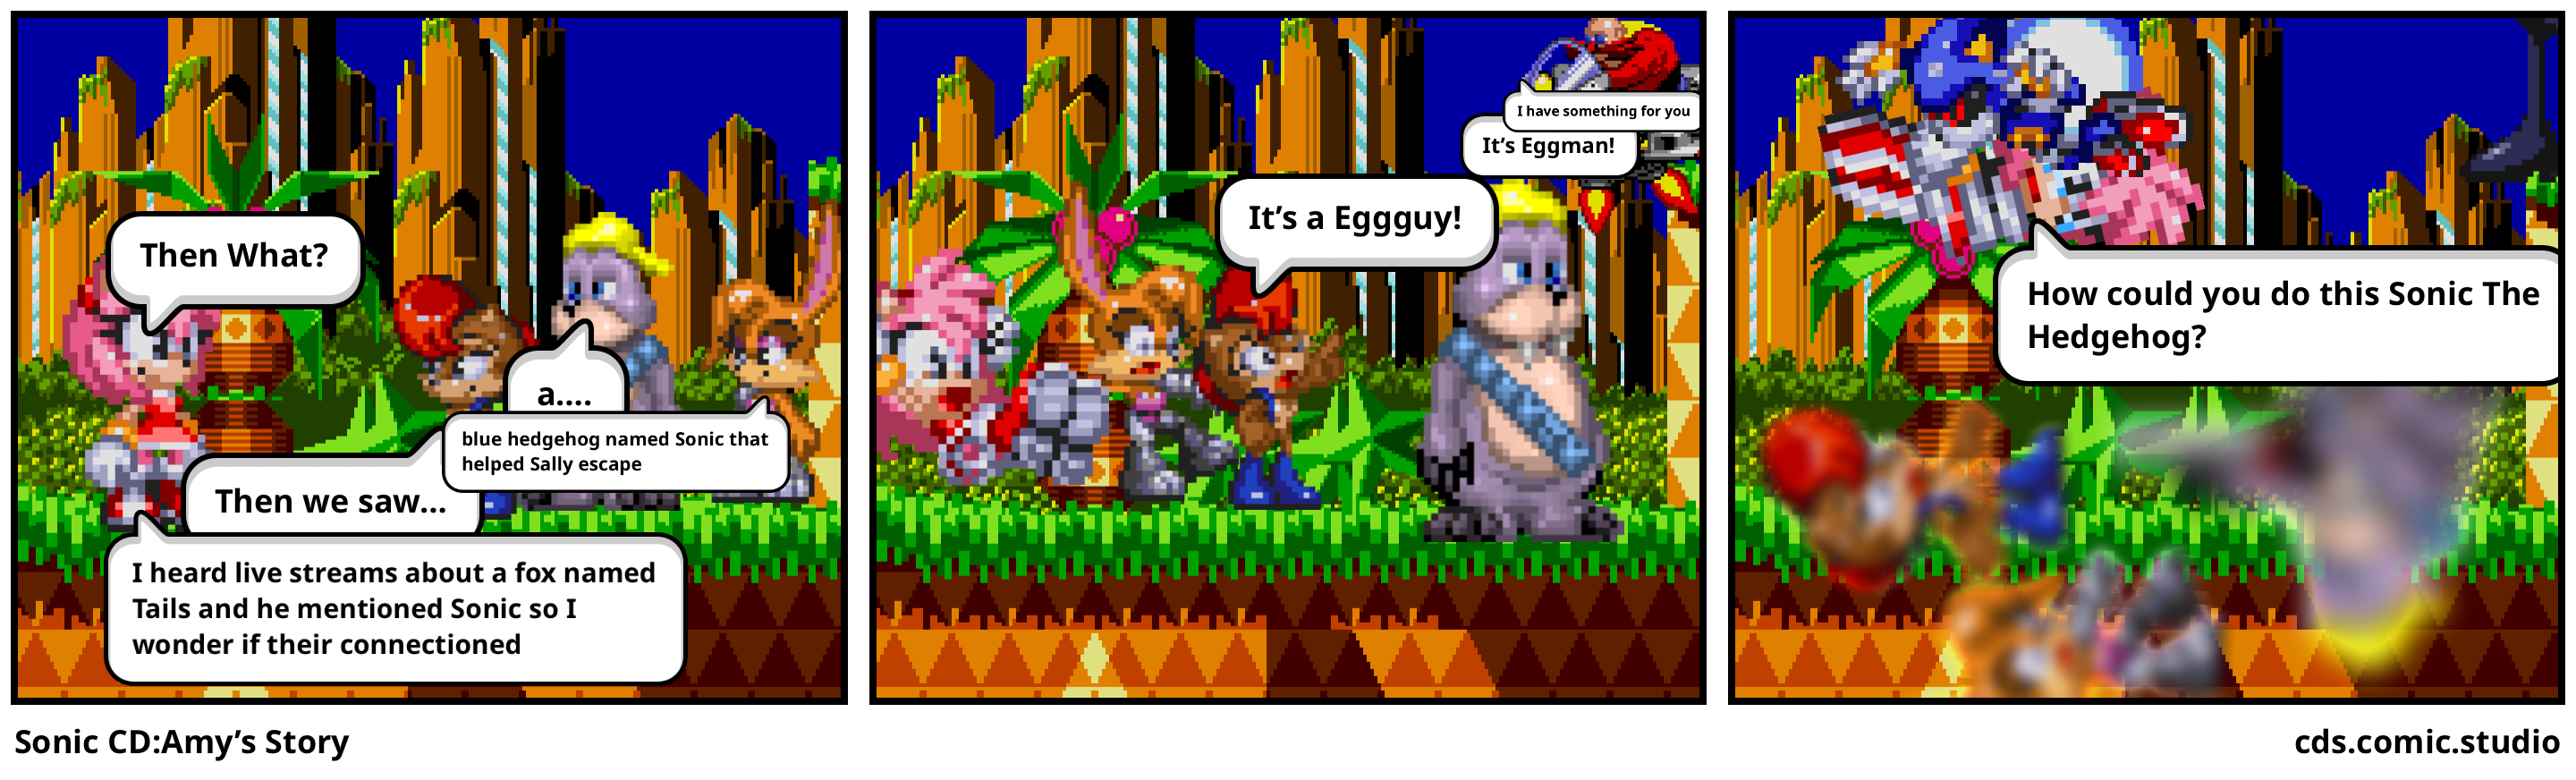 Sonic CD:Amy’s Story